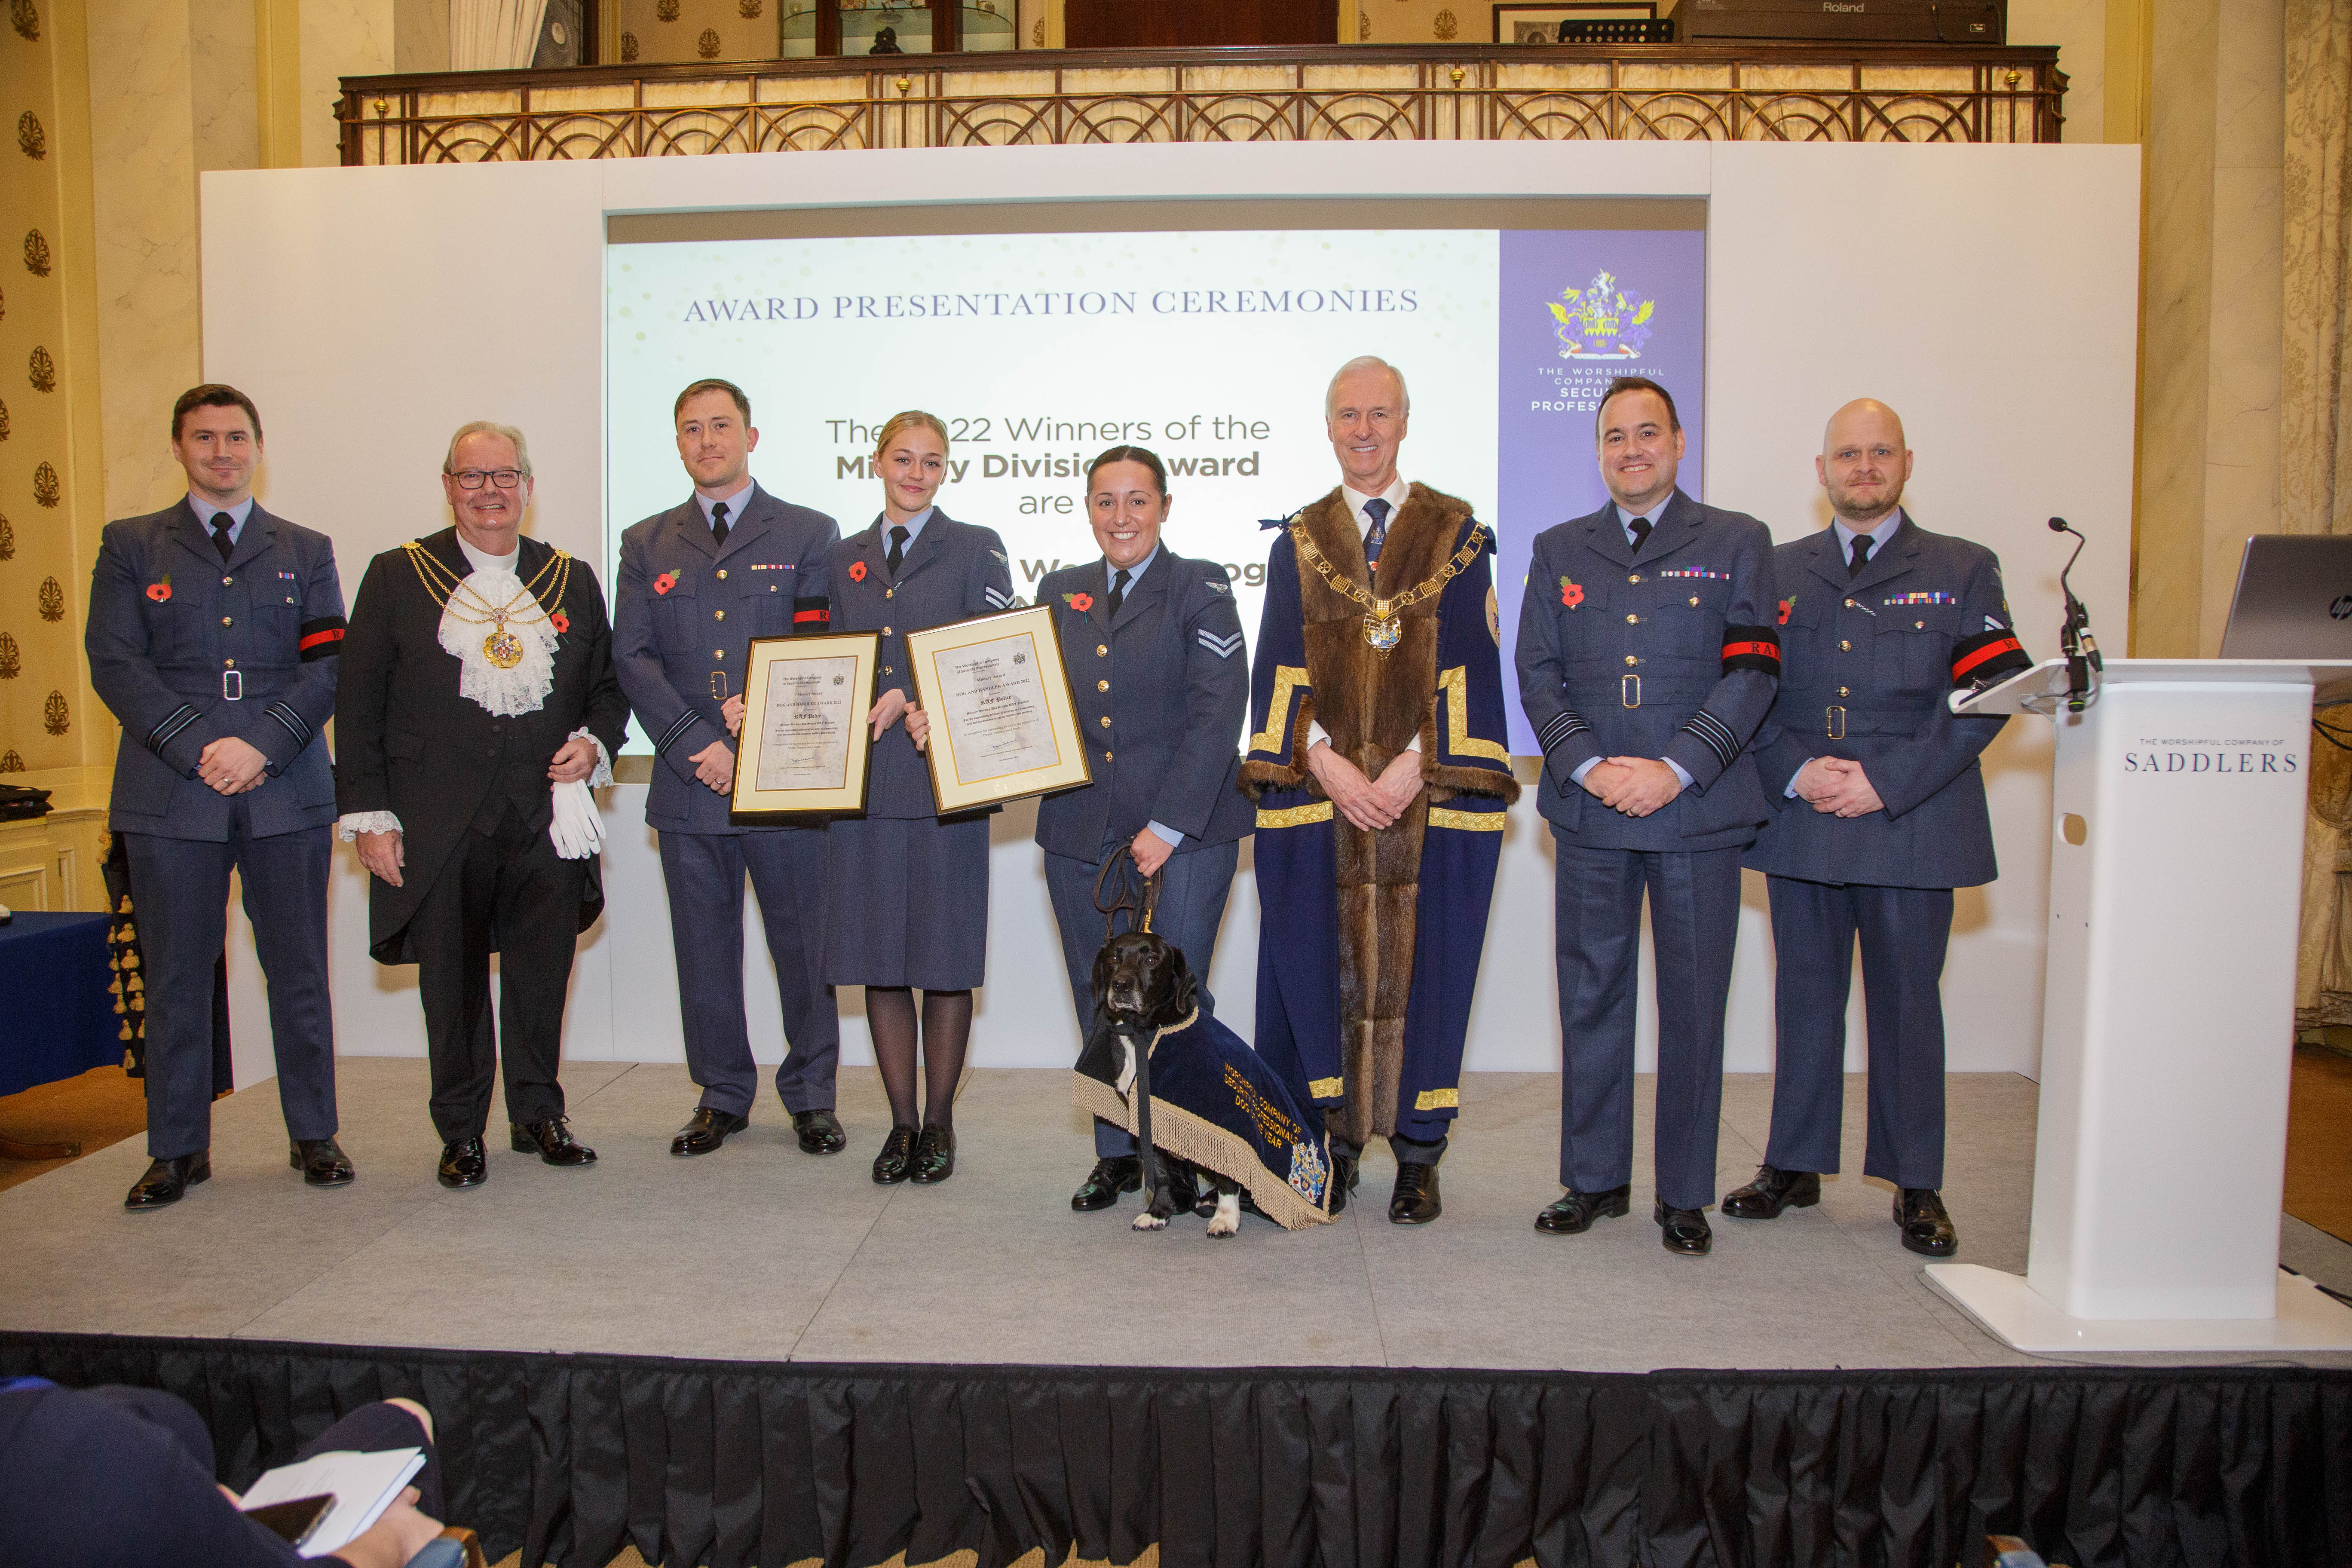 Members of RAF Northolt’s Military Working Dog Section being presented with their award